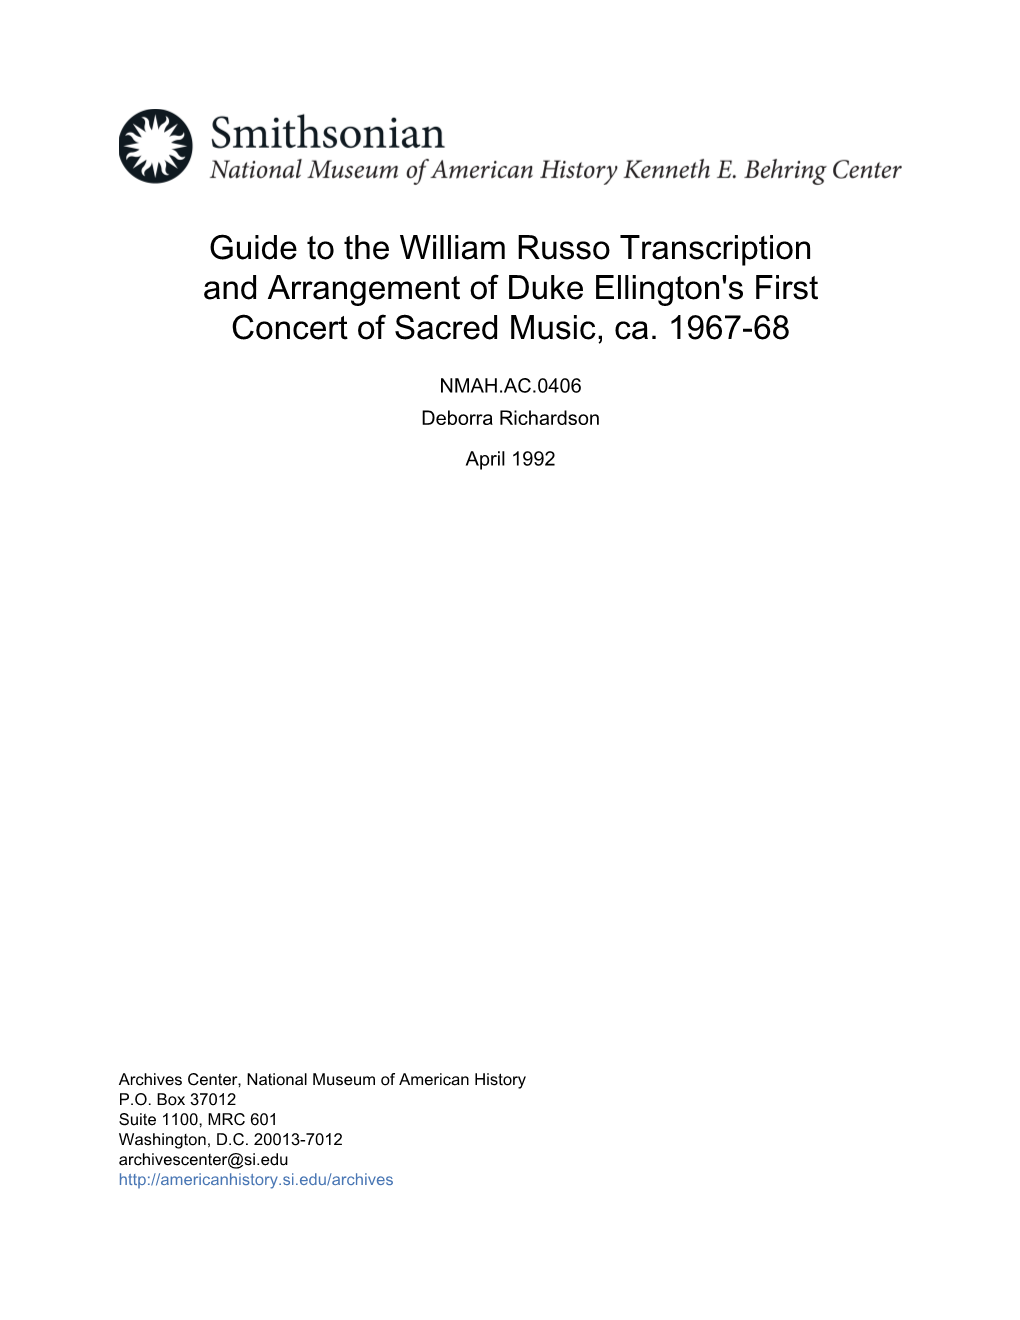 Guide to the William Russo Transcription and Arrangement of Duke Ellington's First Concert of Sacred Music, Ca